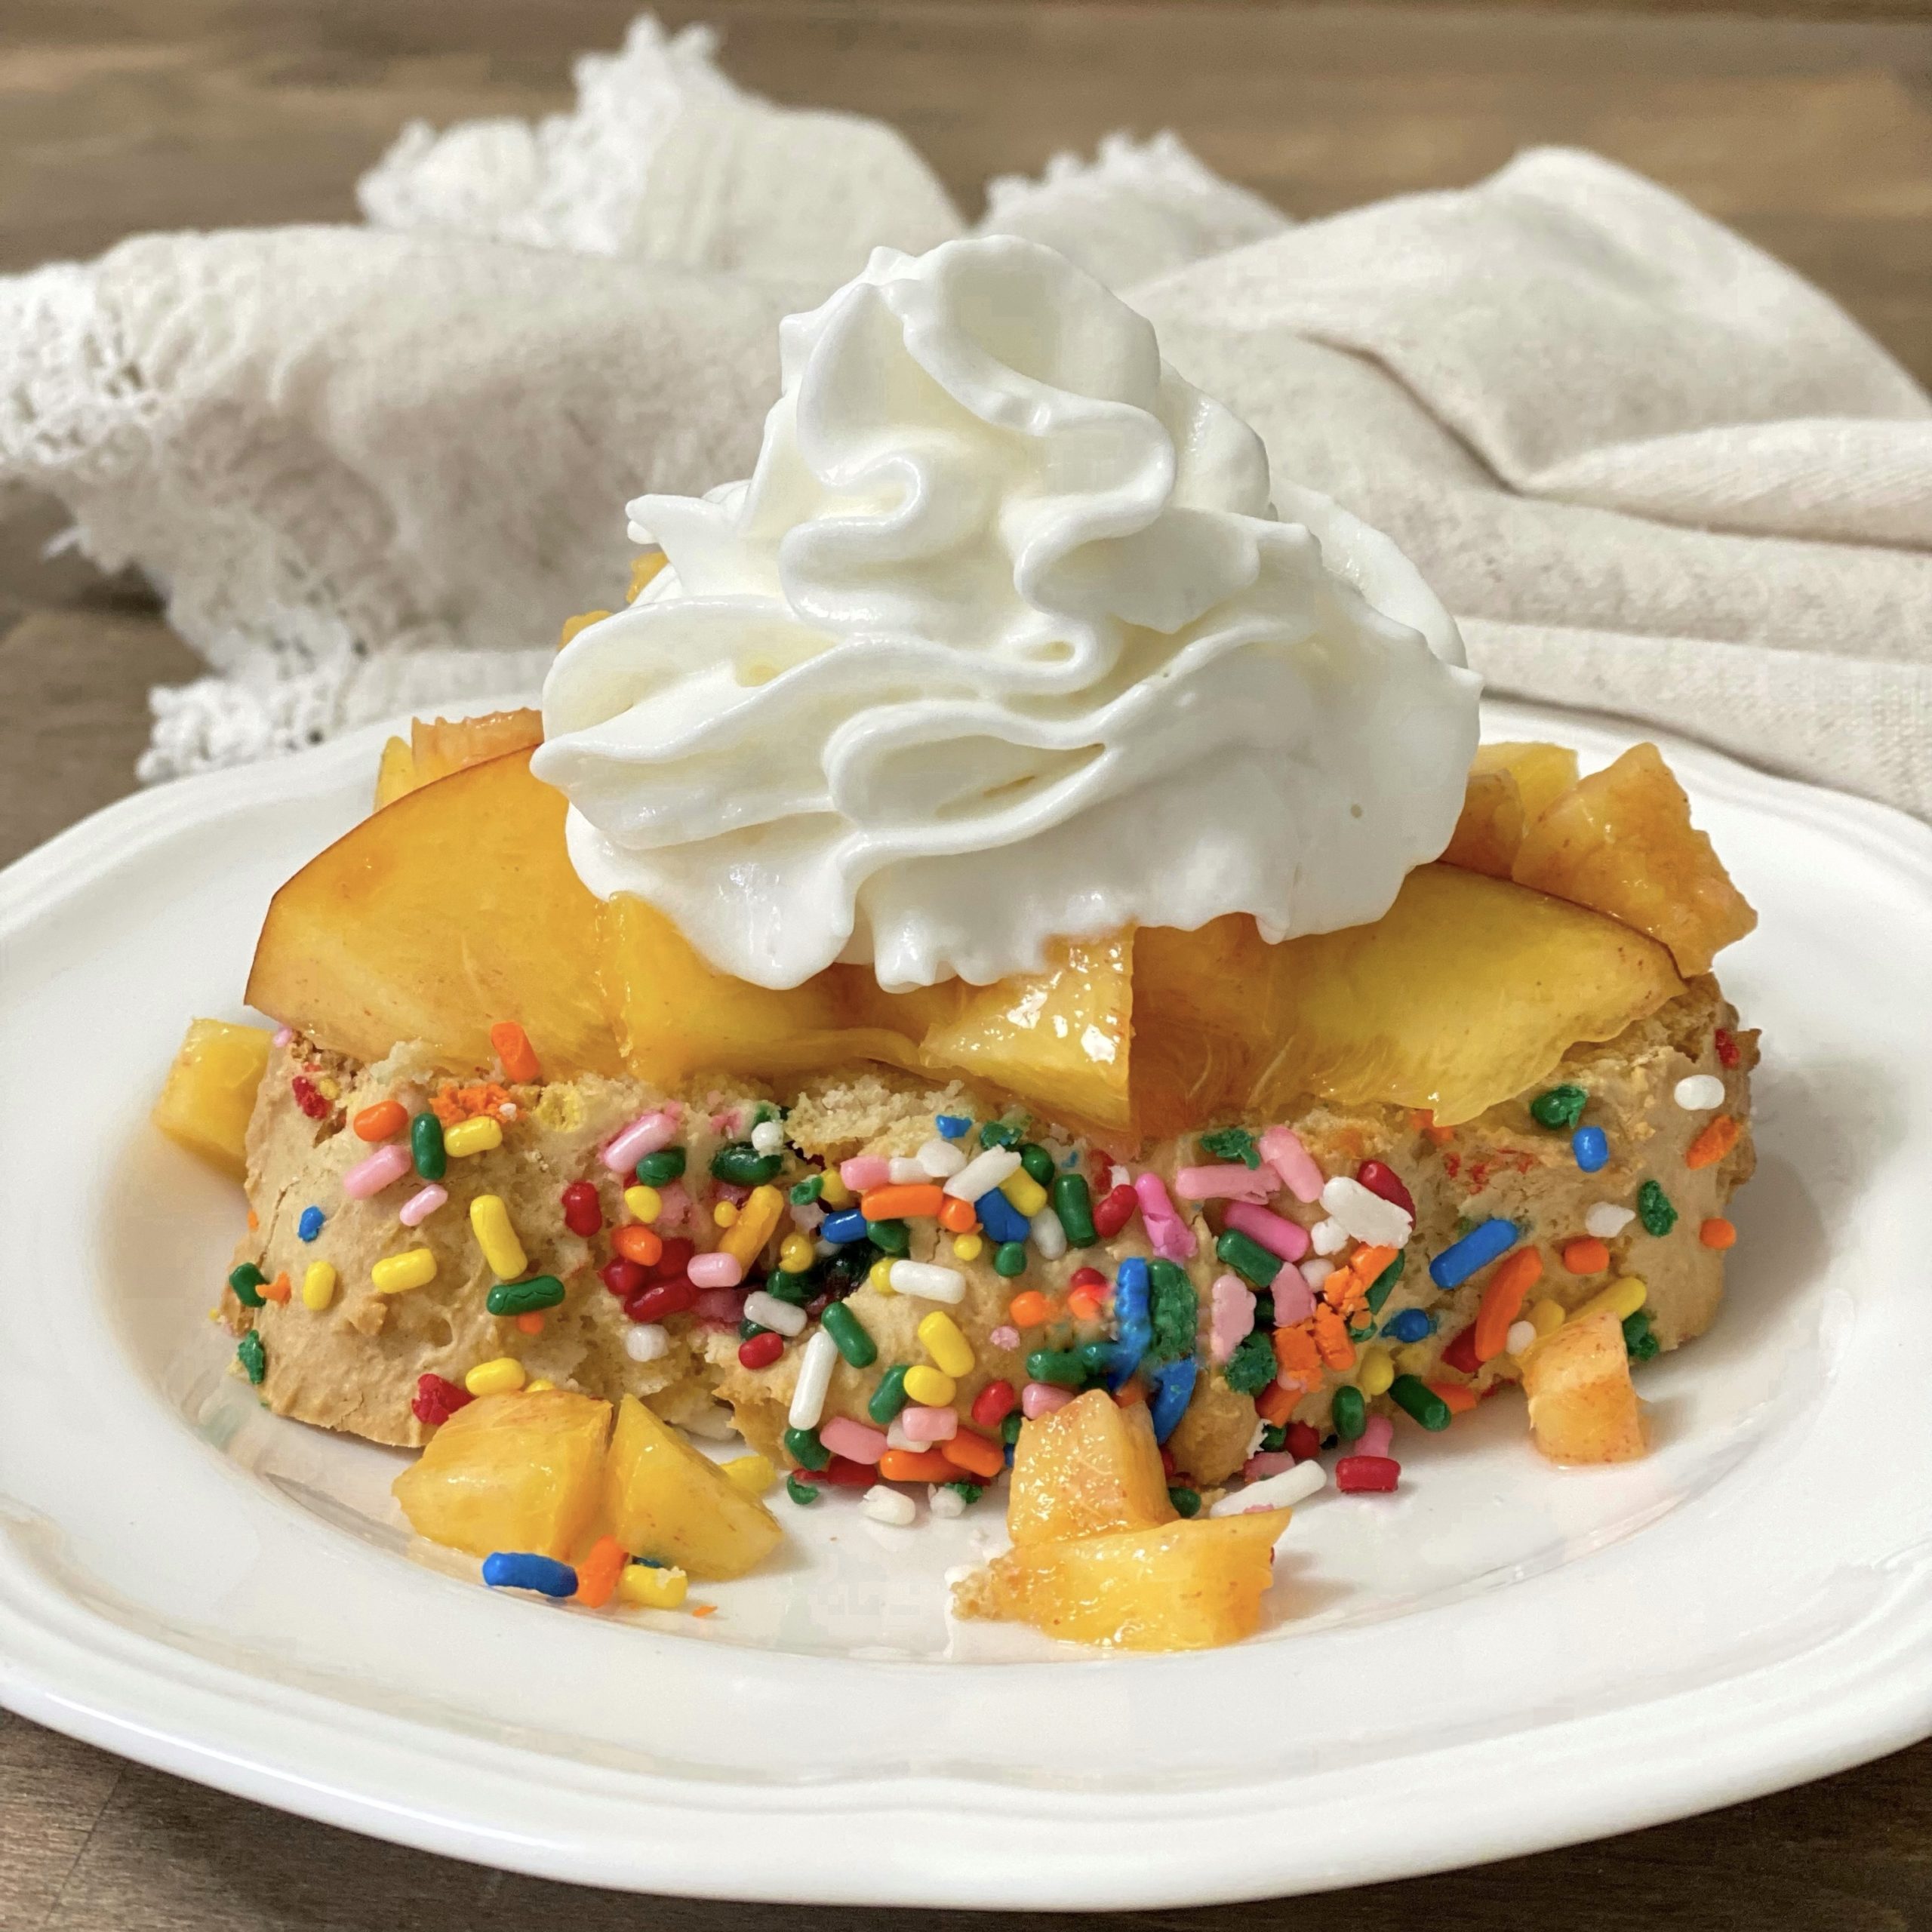 Ice cream bread with sprinkles on a white plate with peaches and whipped cream.